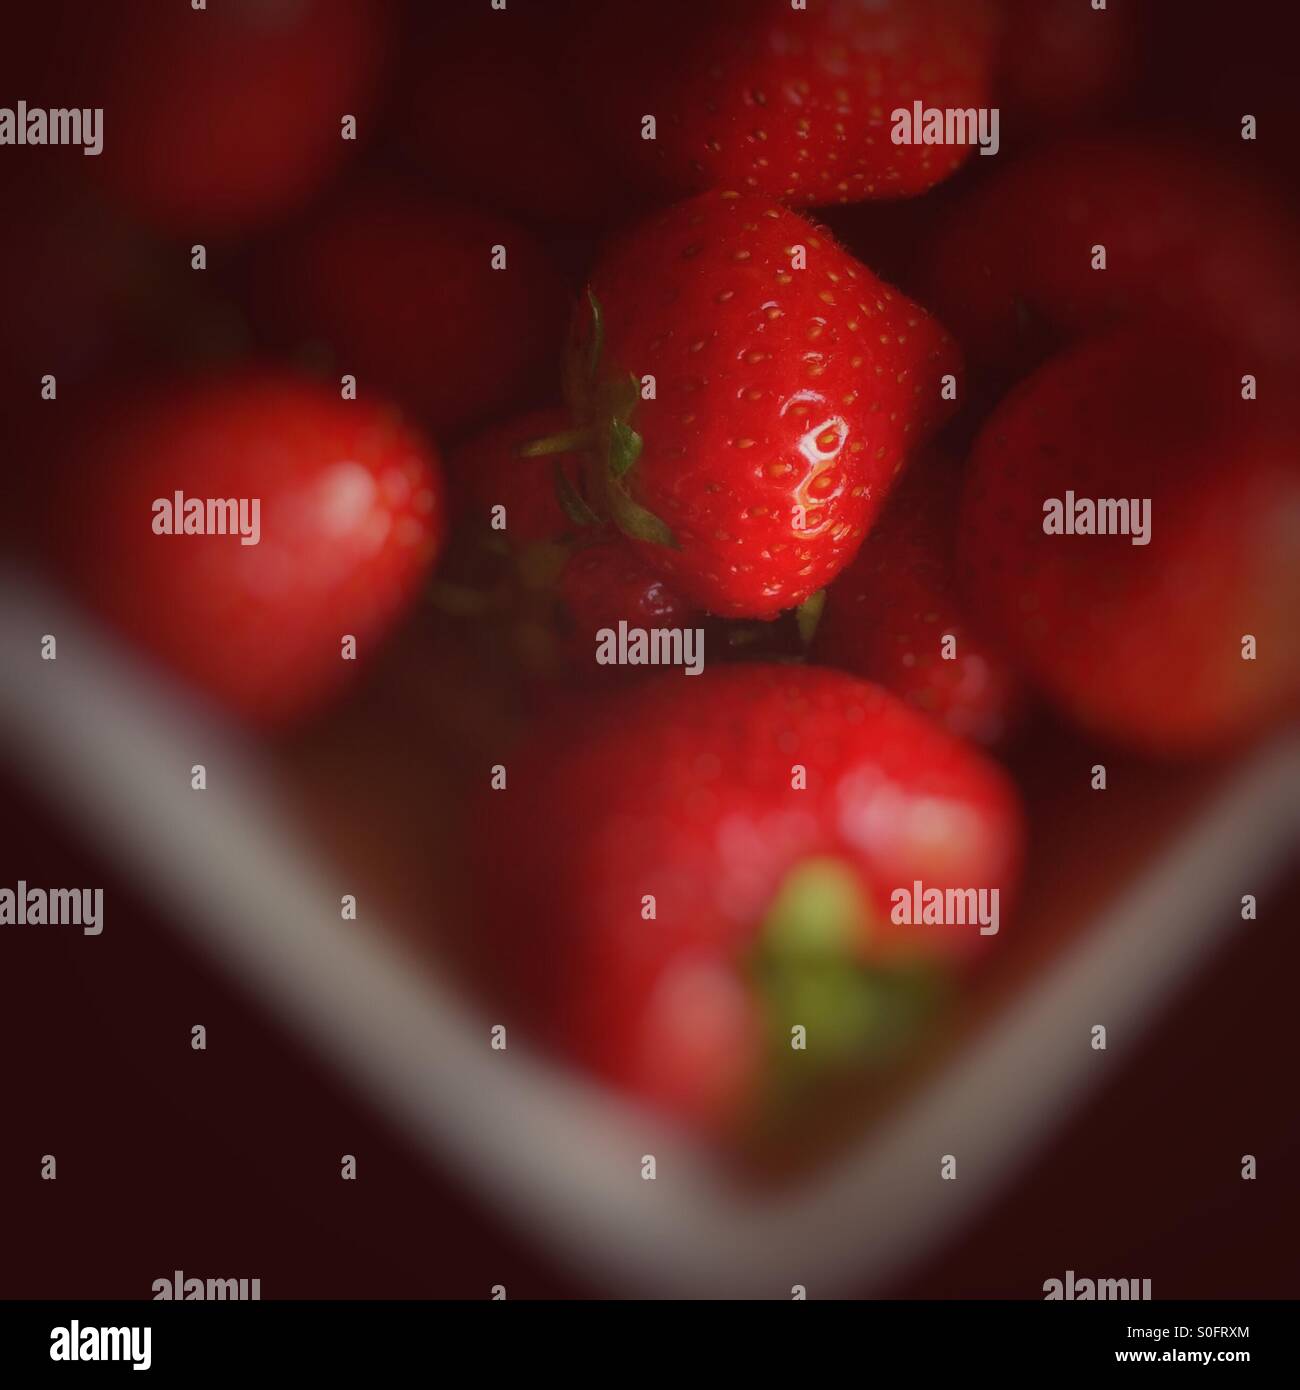 Bowl of strawberries with blur effect Stock Photo